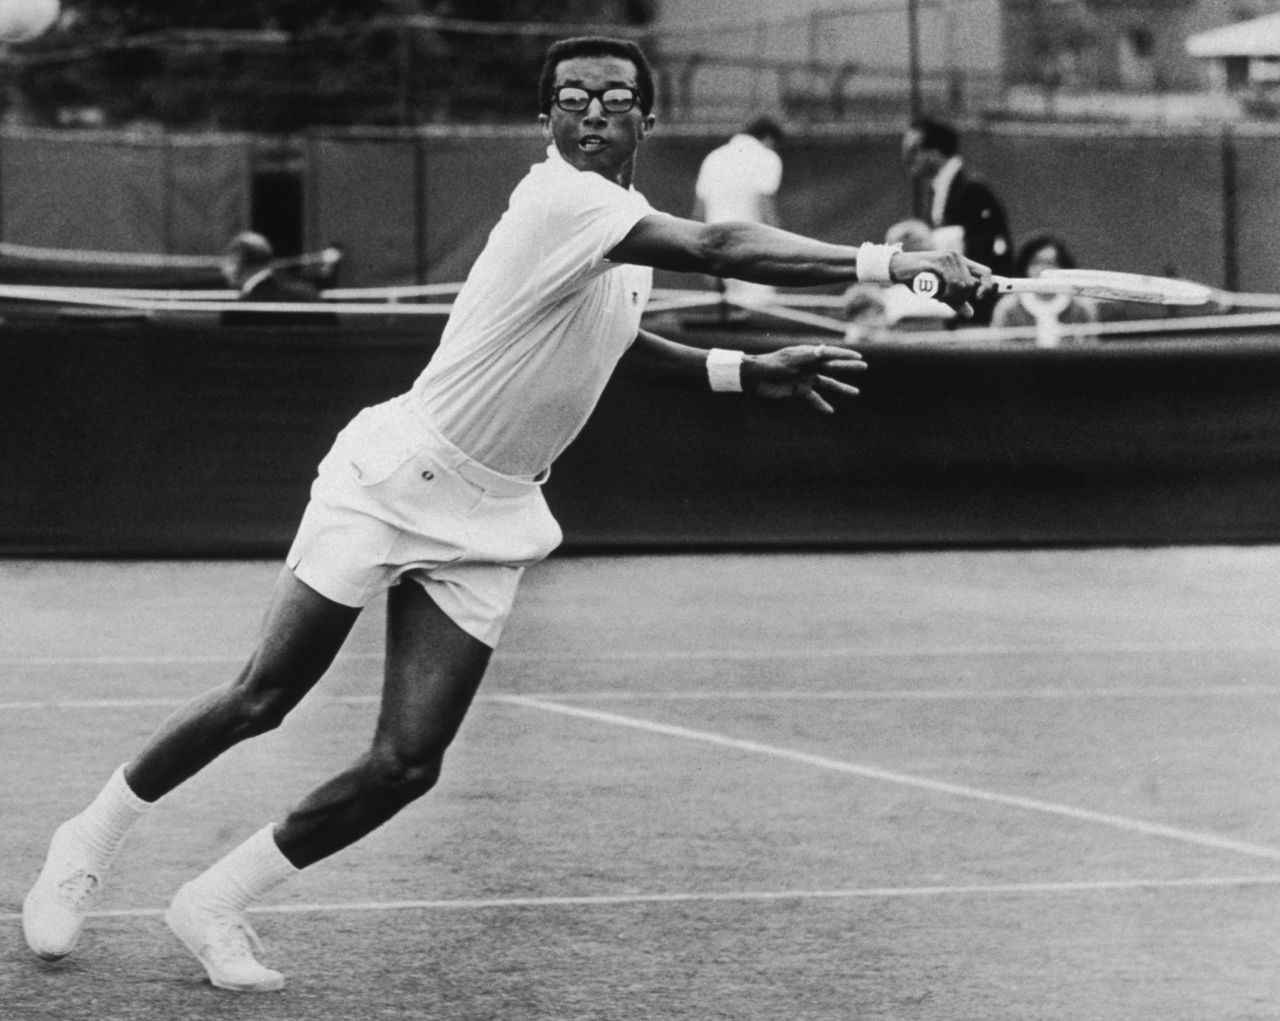 Ashe excelled on faster courts due to his serve and volley style -- as seen here at Wimbledon in 1968.